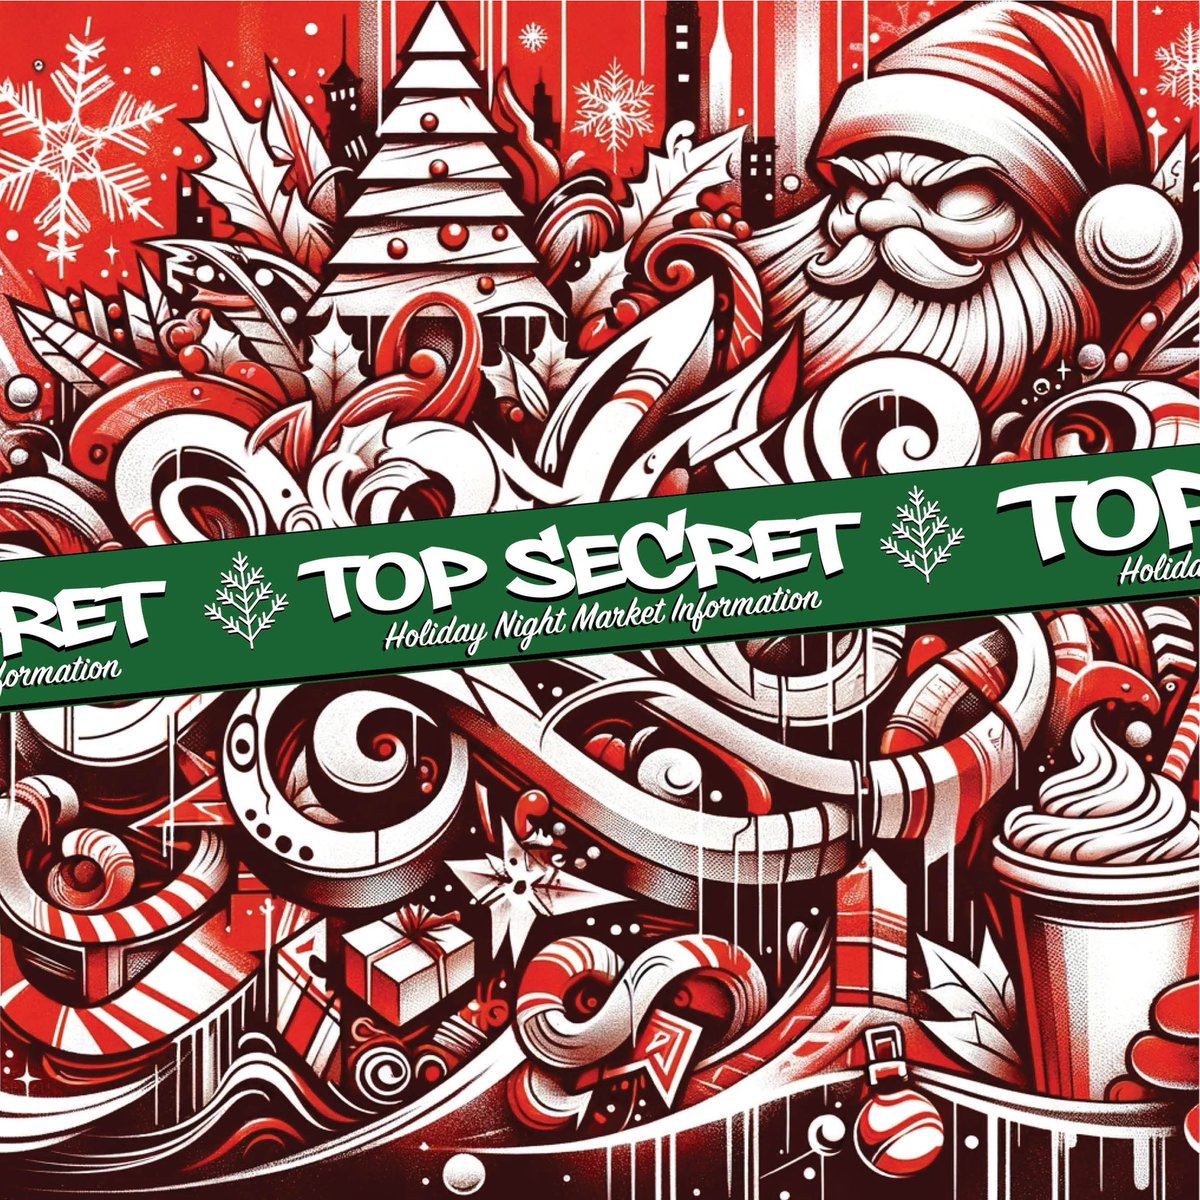 🎄🔒 Shh... The Urban Elves at the UAC have a TOP SECRET holiday project brewing! 🎅🎨 Unleashing urban edginess & festive cheer this Dec 2nd & 3rd in Ottawa. Stay tuned for unforgettable Holiday vibes! Vendors, DM us!
#UrbanHolidayMarket #OttawaEvents #SecretSantaOttawa 🌟